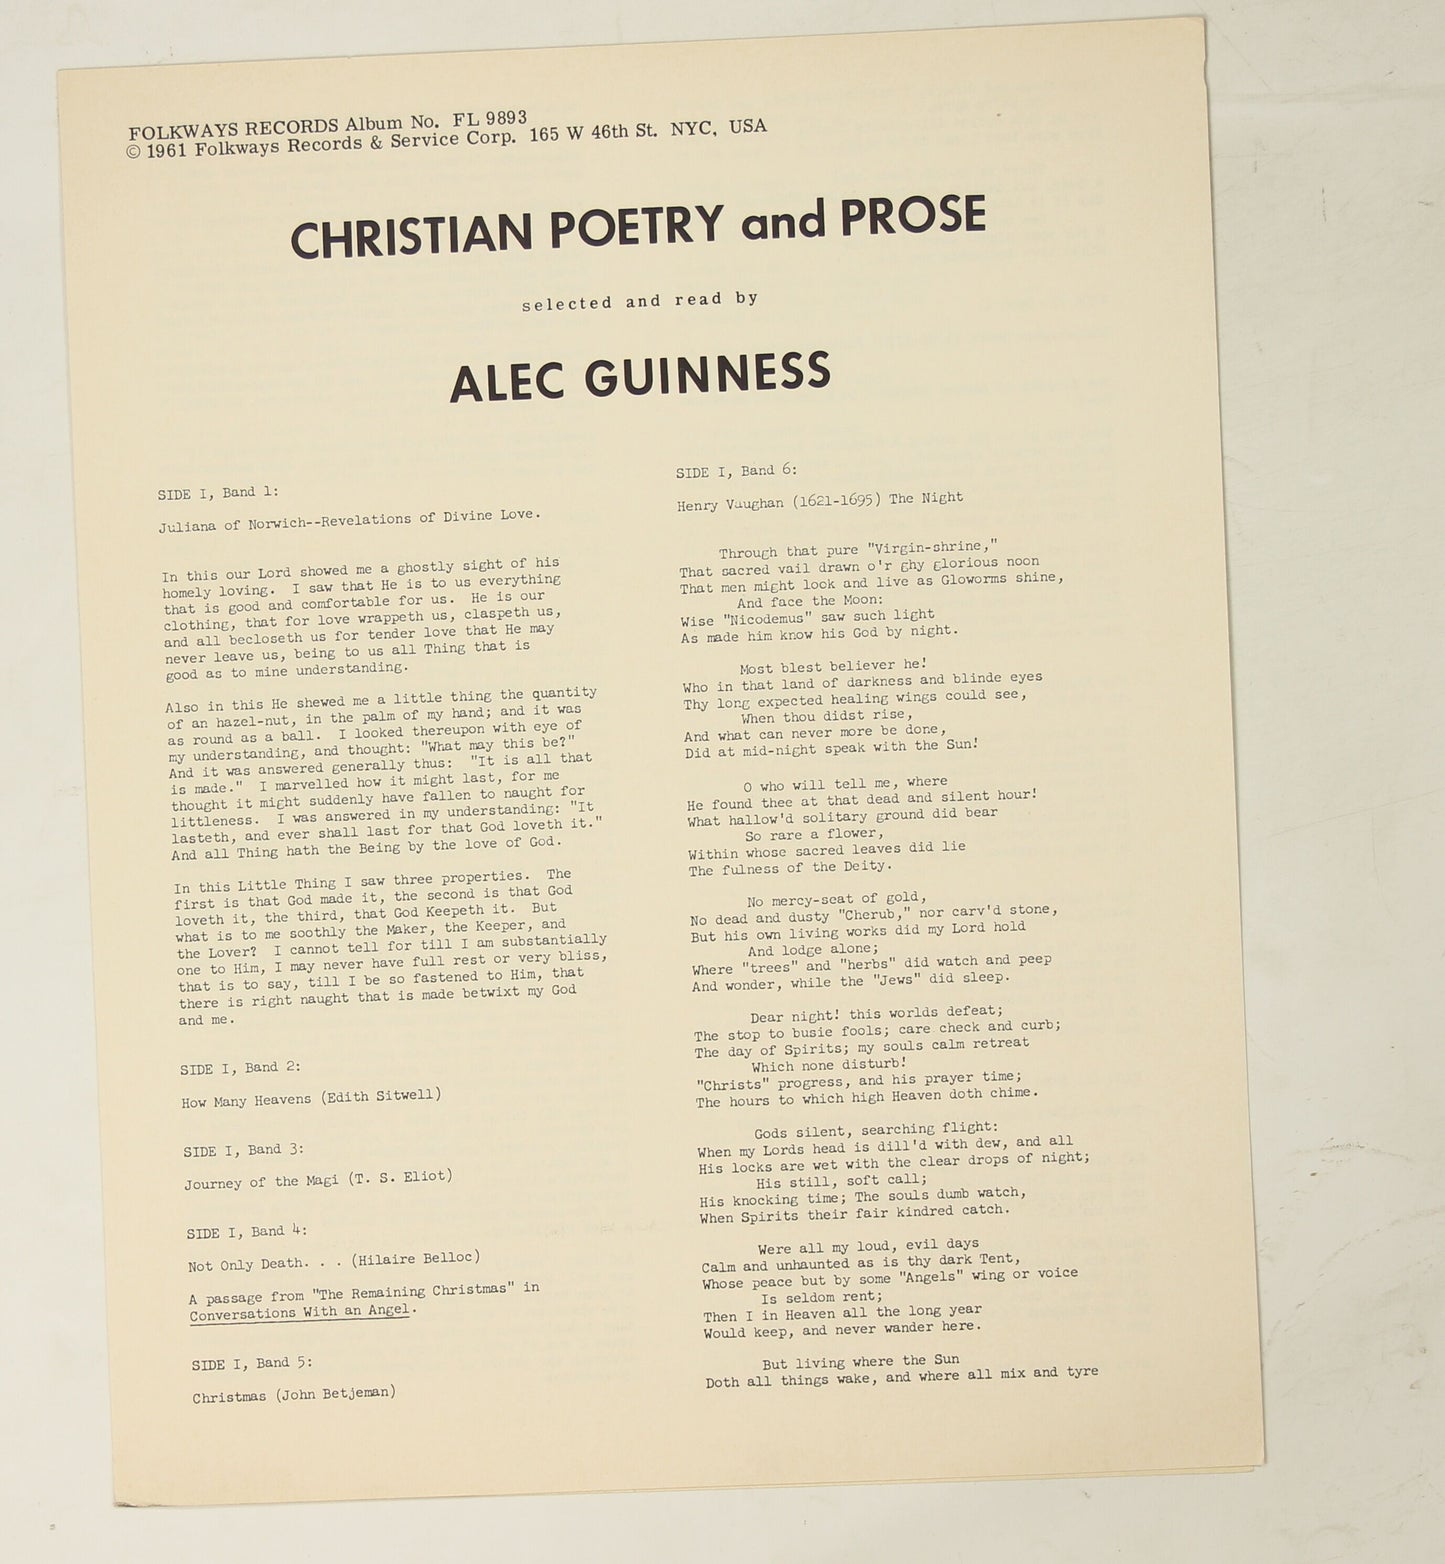 ALEC GUINNESS / READS SPIRITUAL AND RELIGIOUS POETRY AND PROSE